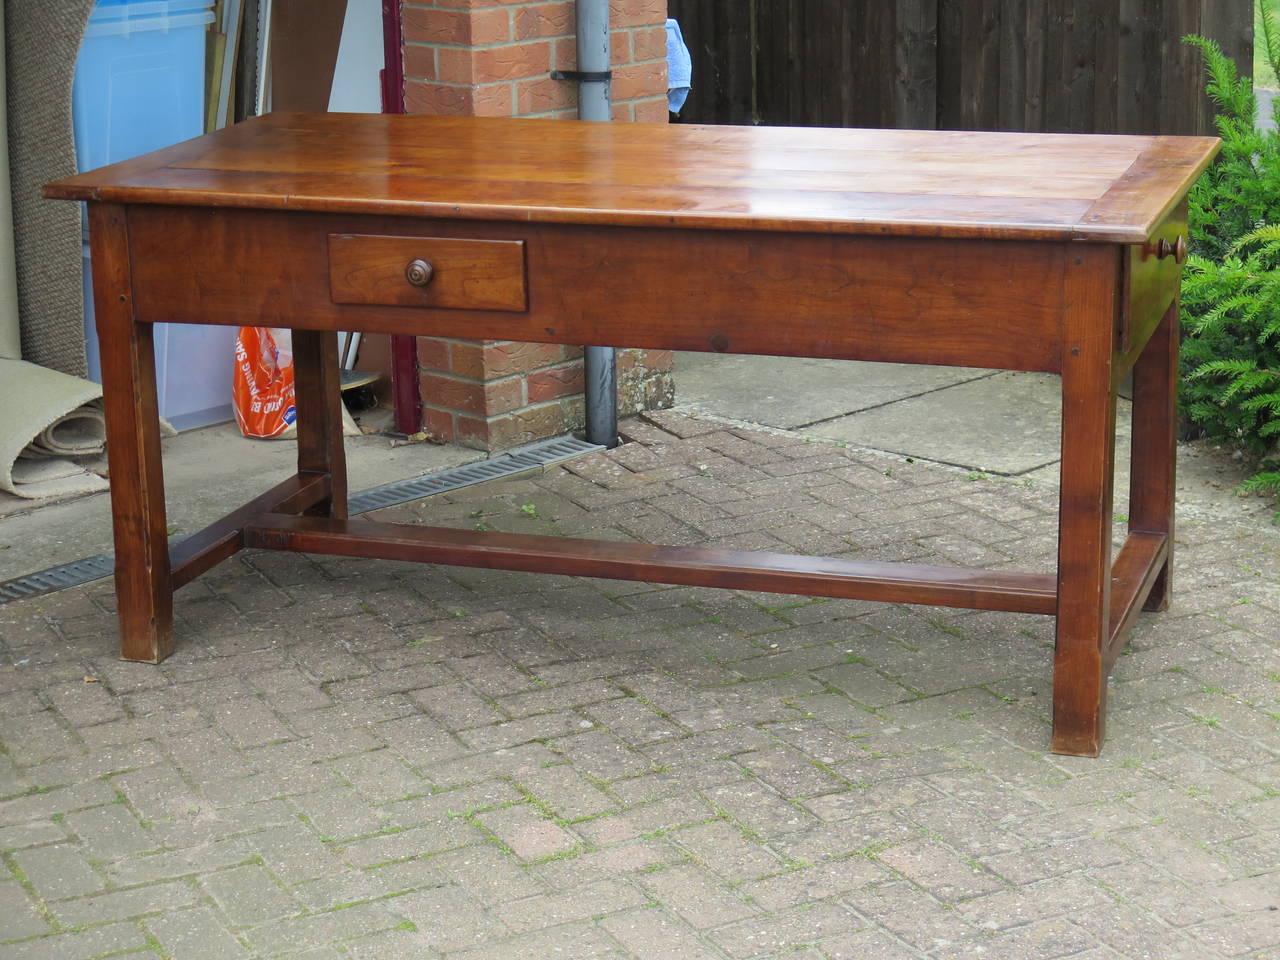 This is a superb French Refectory / Farmhouse / Dining Table.

The table is made of solid Fruitwood, probably Cherry wood. It is of pegged construction with four planks to the top, cleated either end. The freeze has a drawer on either long side